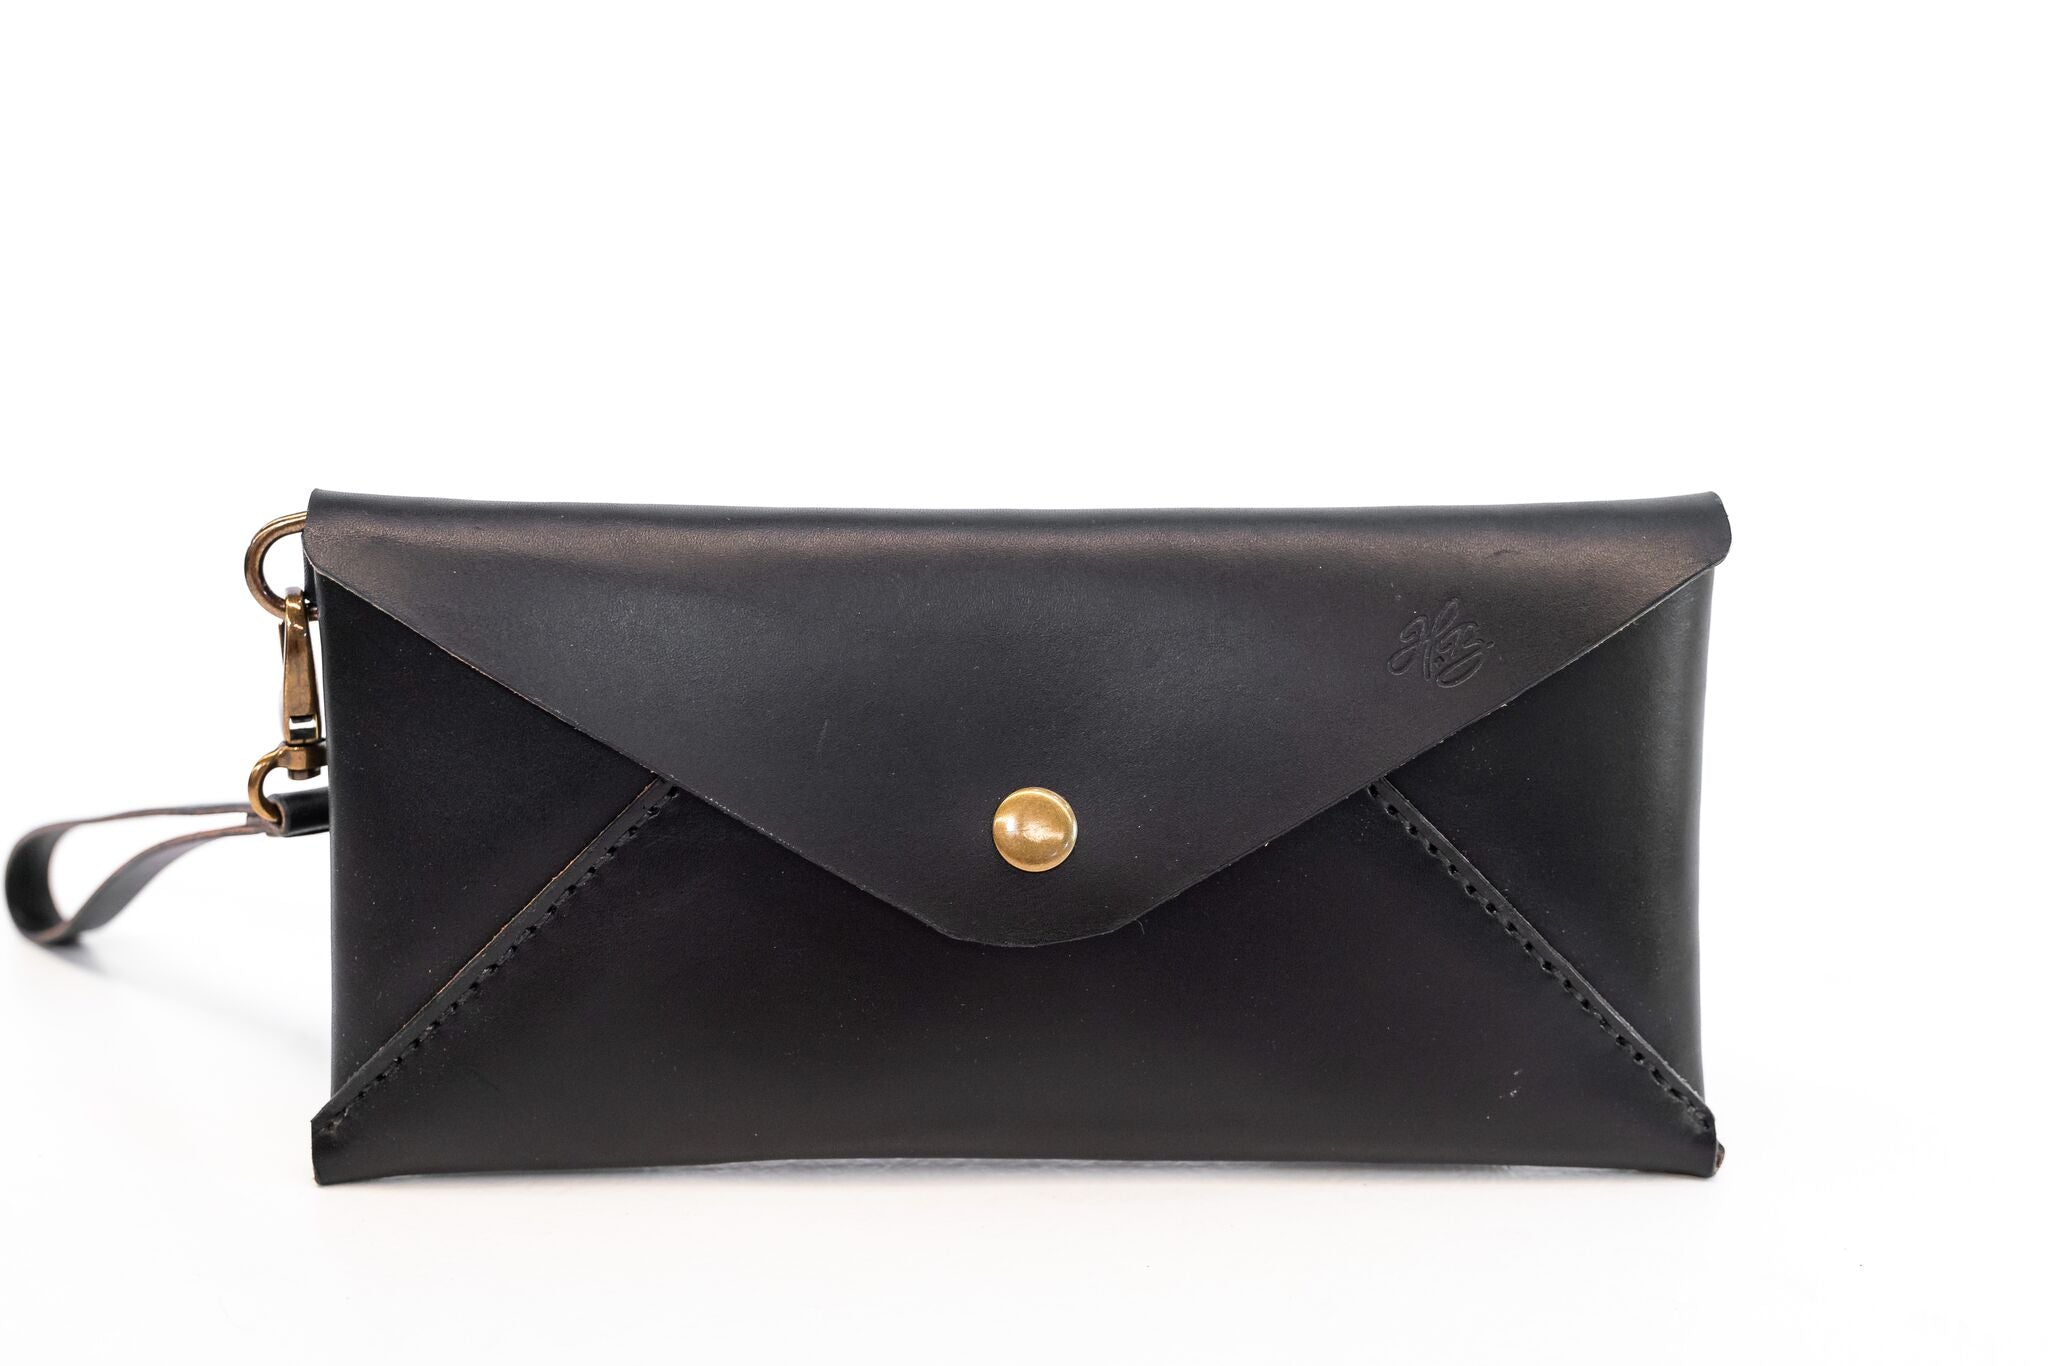 Black/Silver Quilted Envelope Clutch